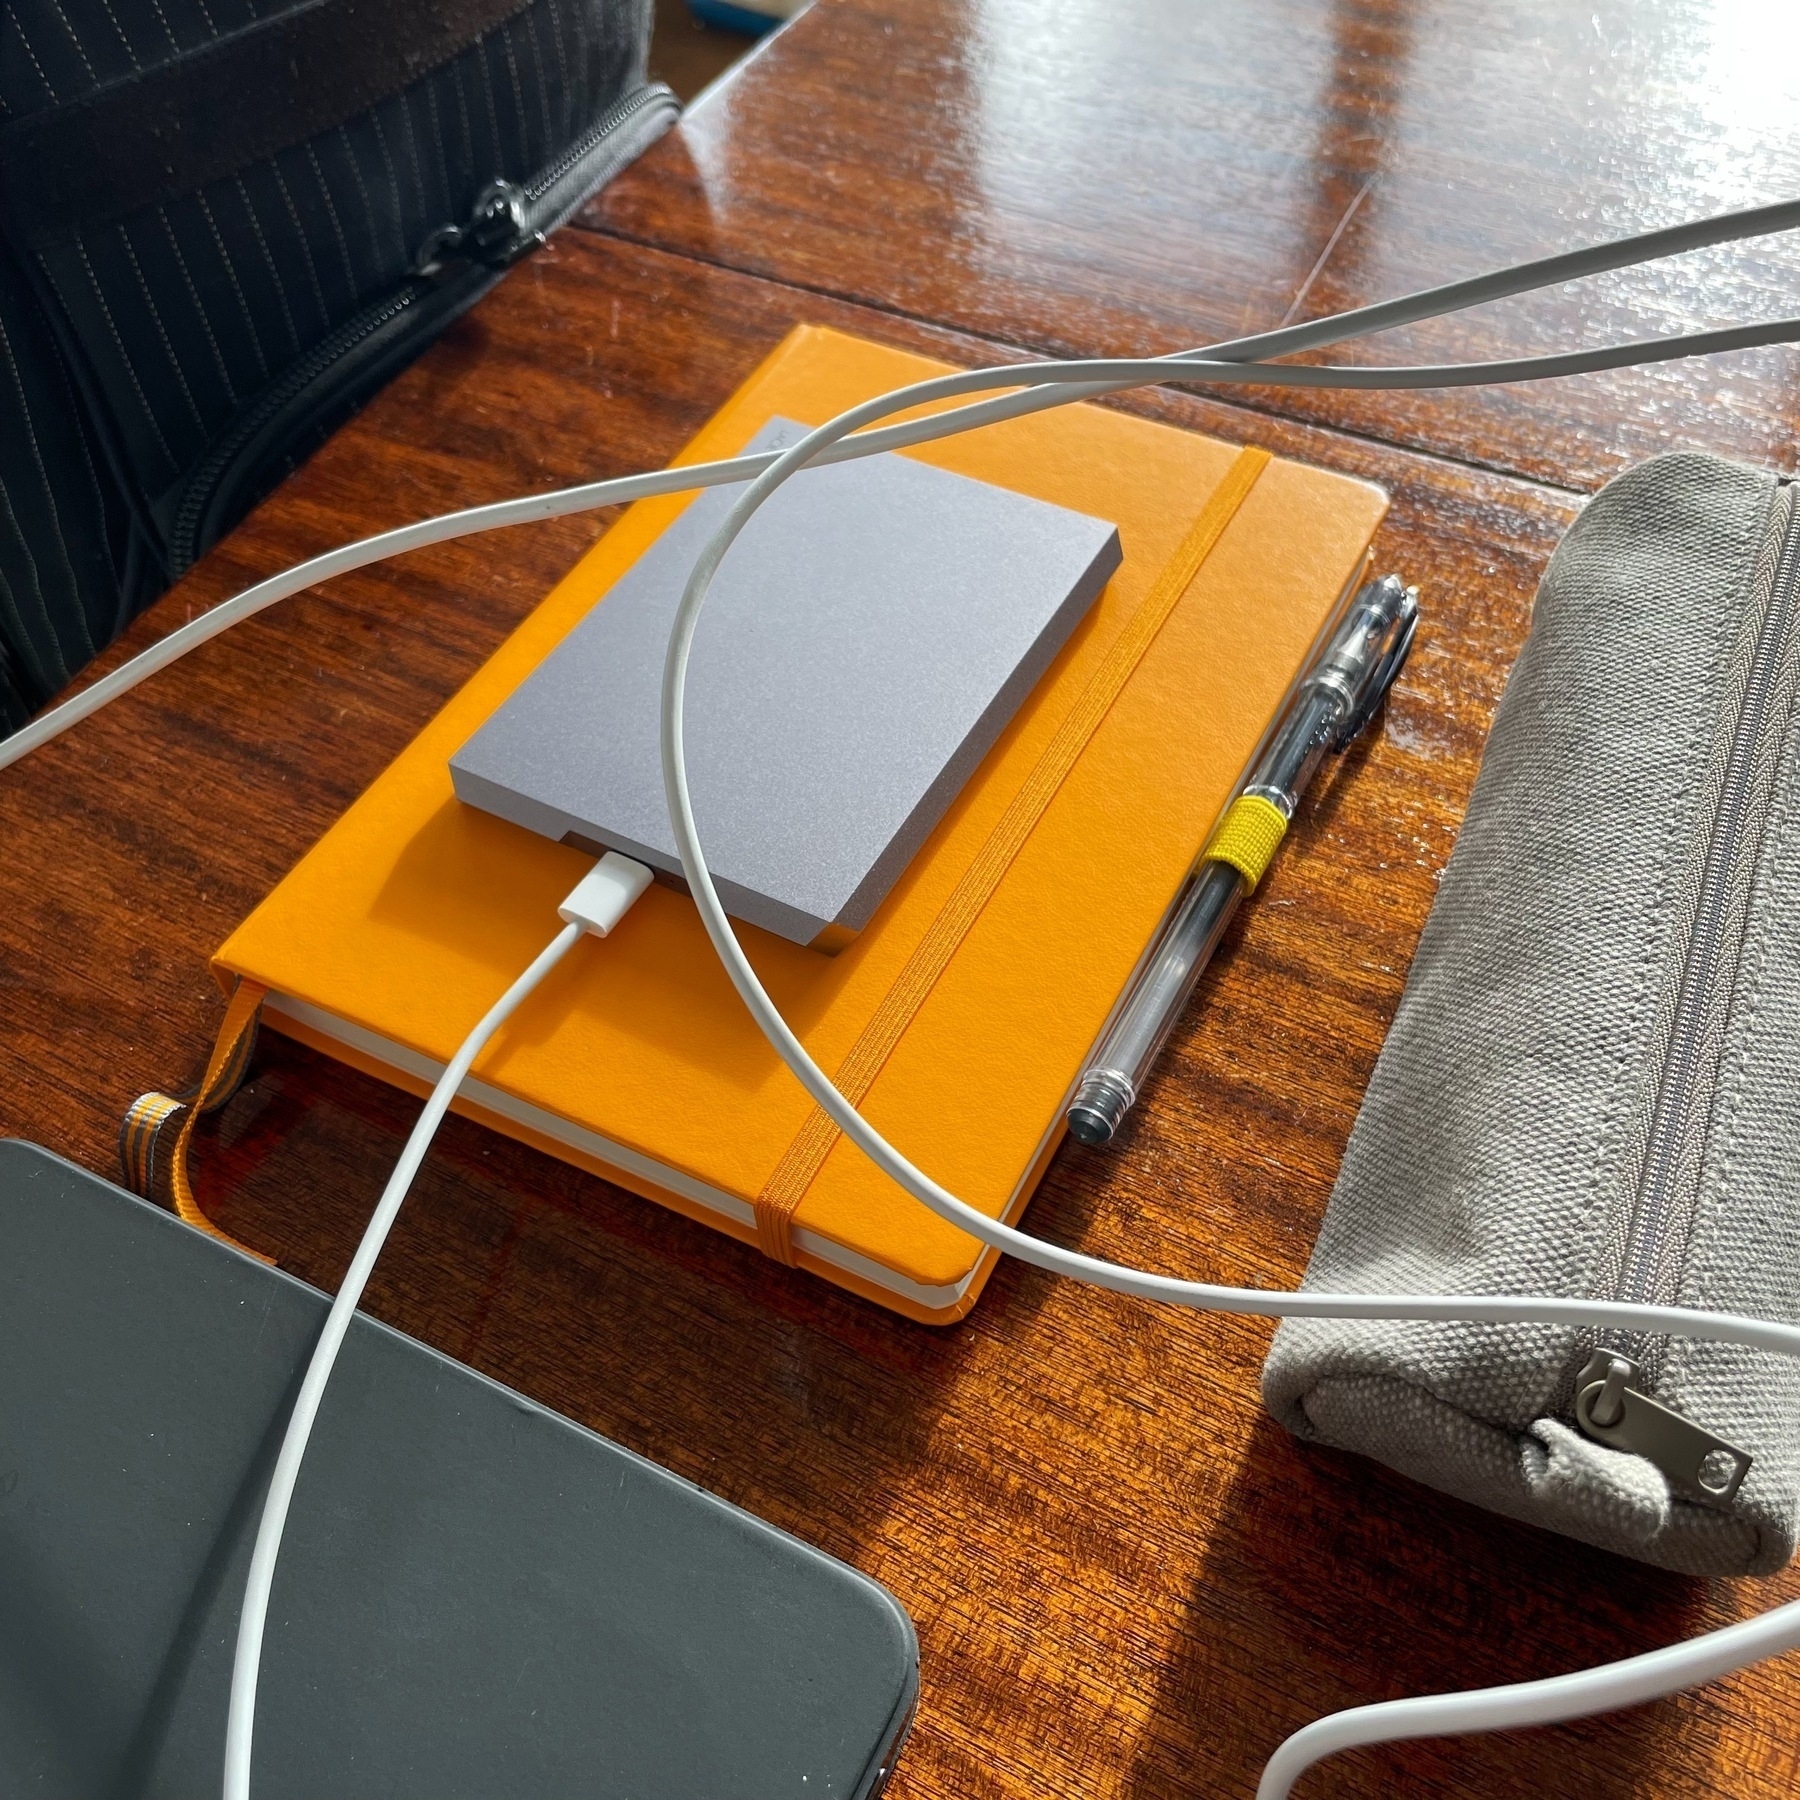 A yellow notebook, in which is sat a silver hard drive. There is also a tangle of white cables.